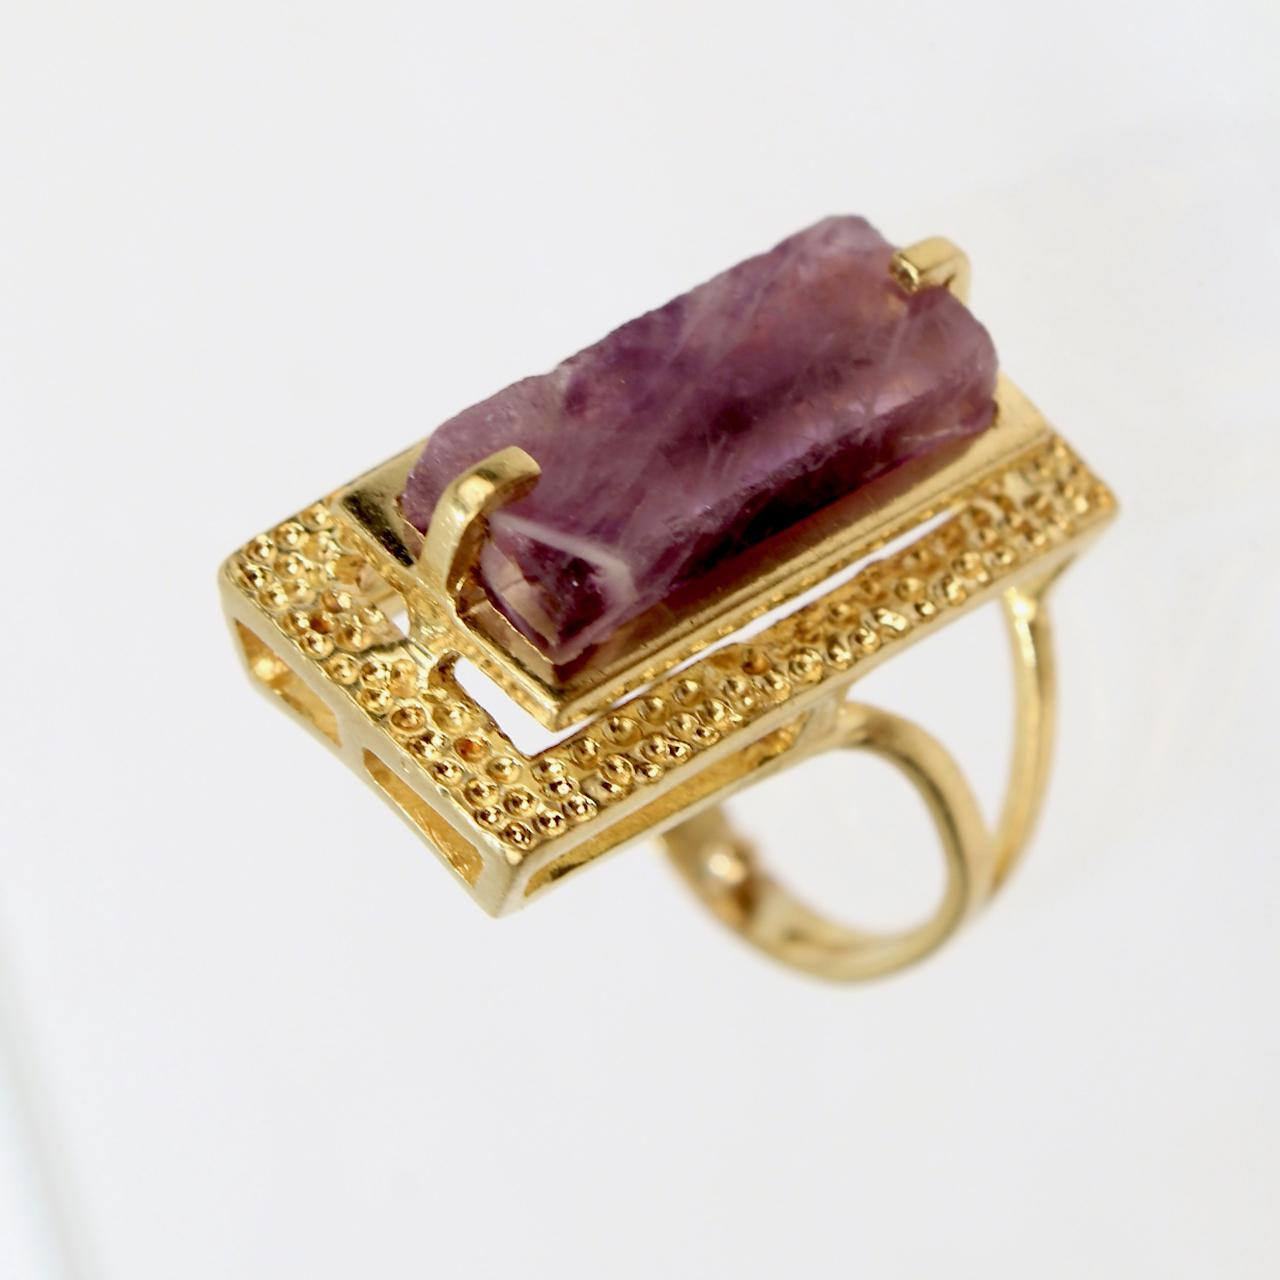 Modernist Asymmetrical 18k Gold and Rough Cut Amethyst Gemstone Cocktail Ring For Sale 4